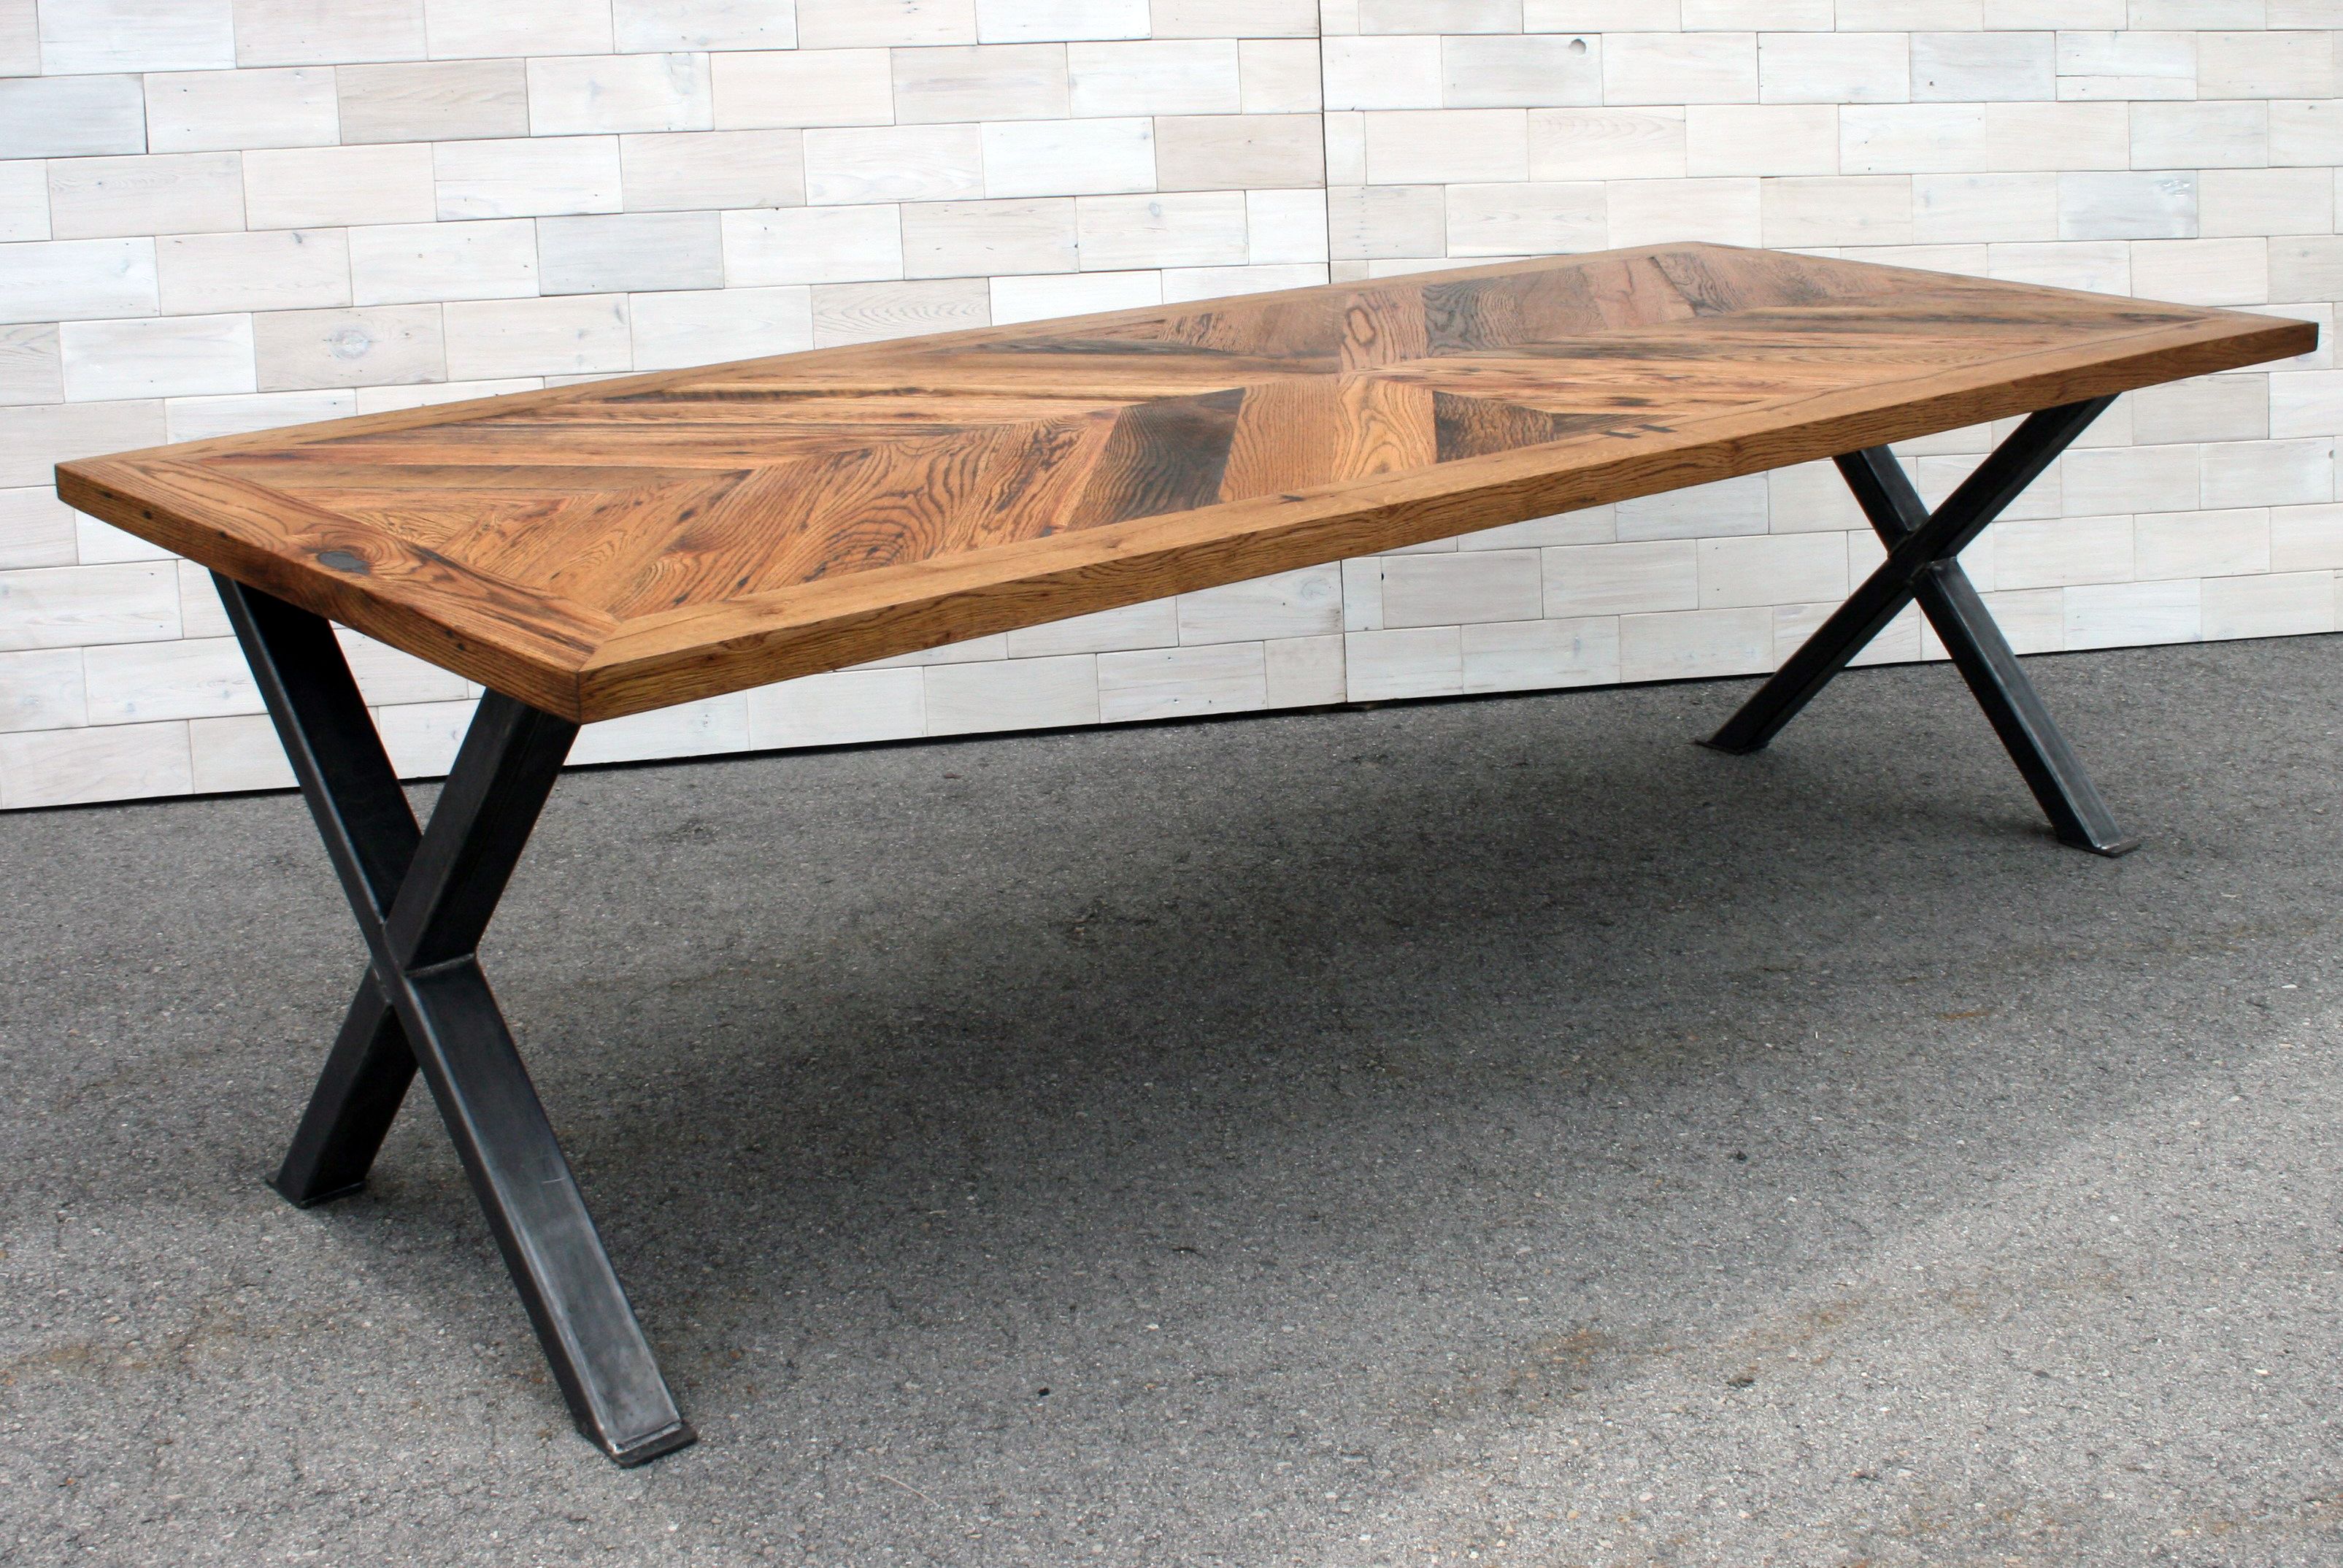 Wooden Dining Room Table With Metal Legs